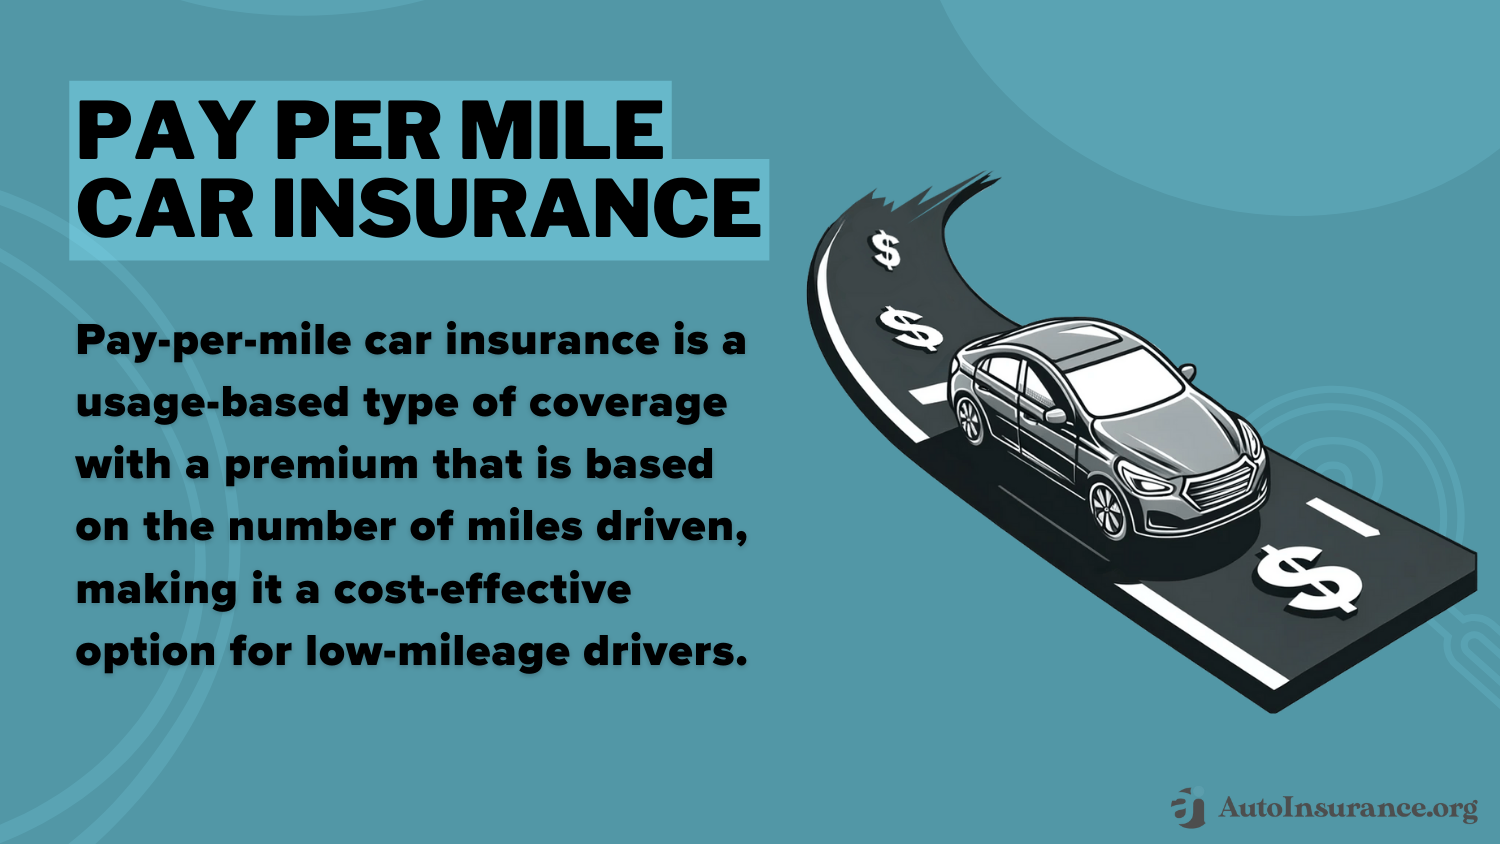 Government Assistance Programs for Low-Income Drivers: Pay Per Mile Car Insurance Definition Card